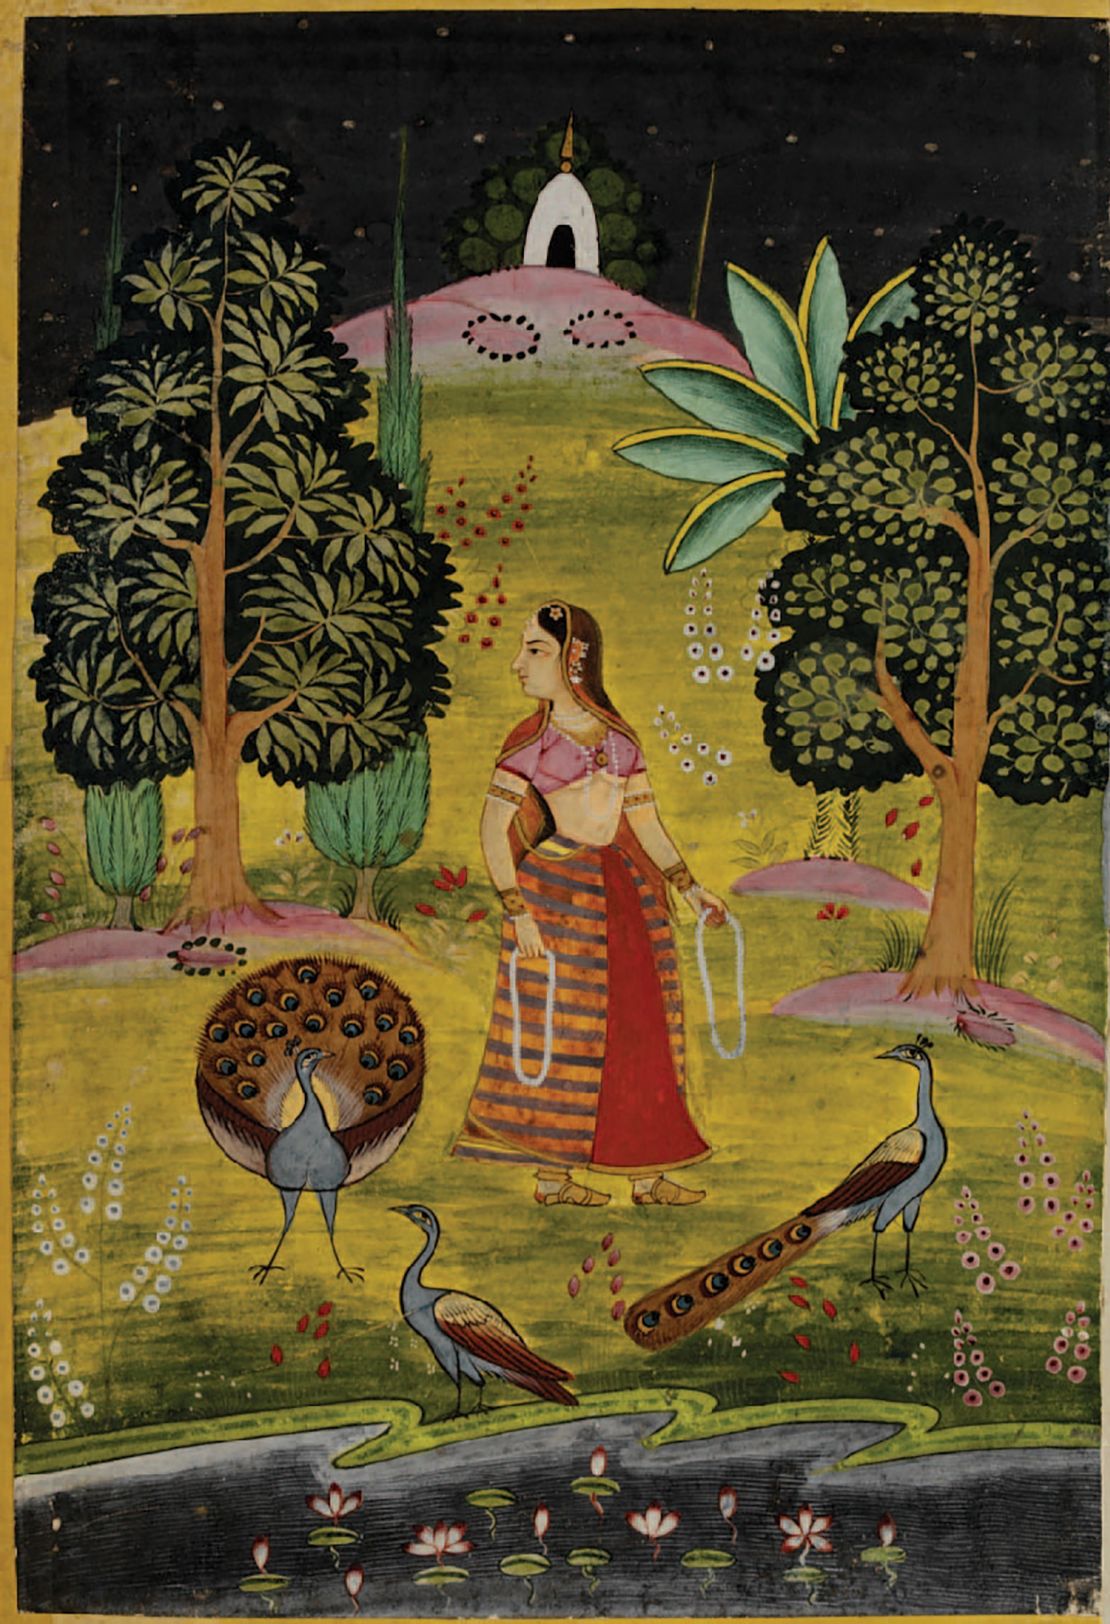 The Victoria and Albert museum's original Garden of Ragini wall mural, circa 1700, from southern India. The piece provided inspiration for 1838 Wallcovering's new version (top).